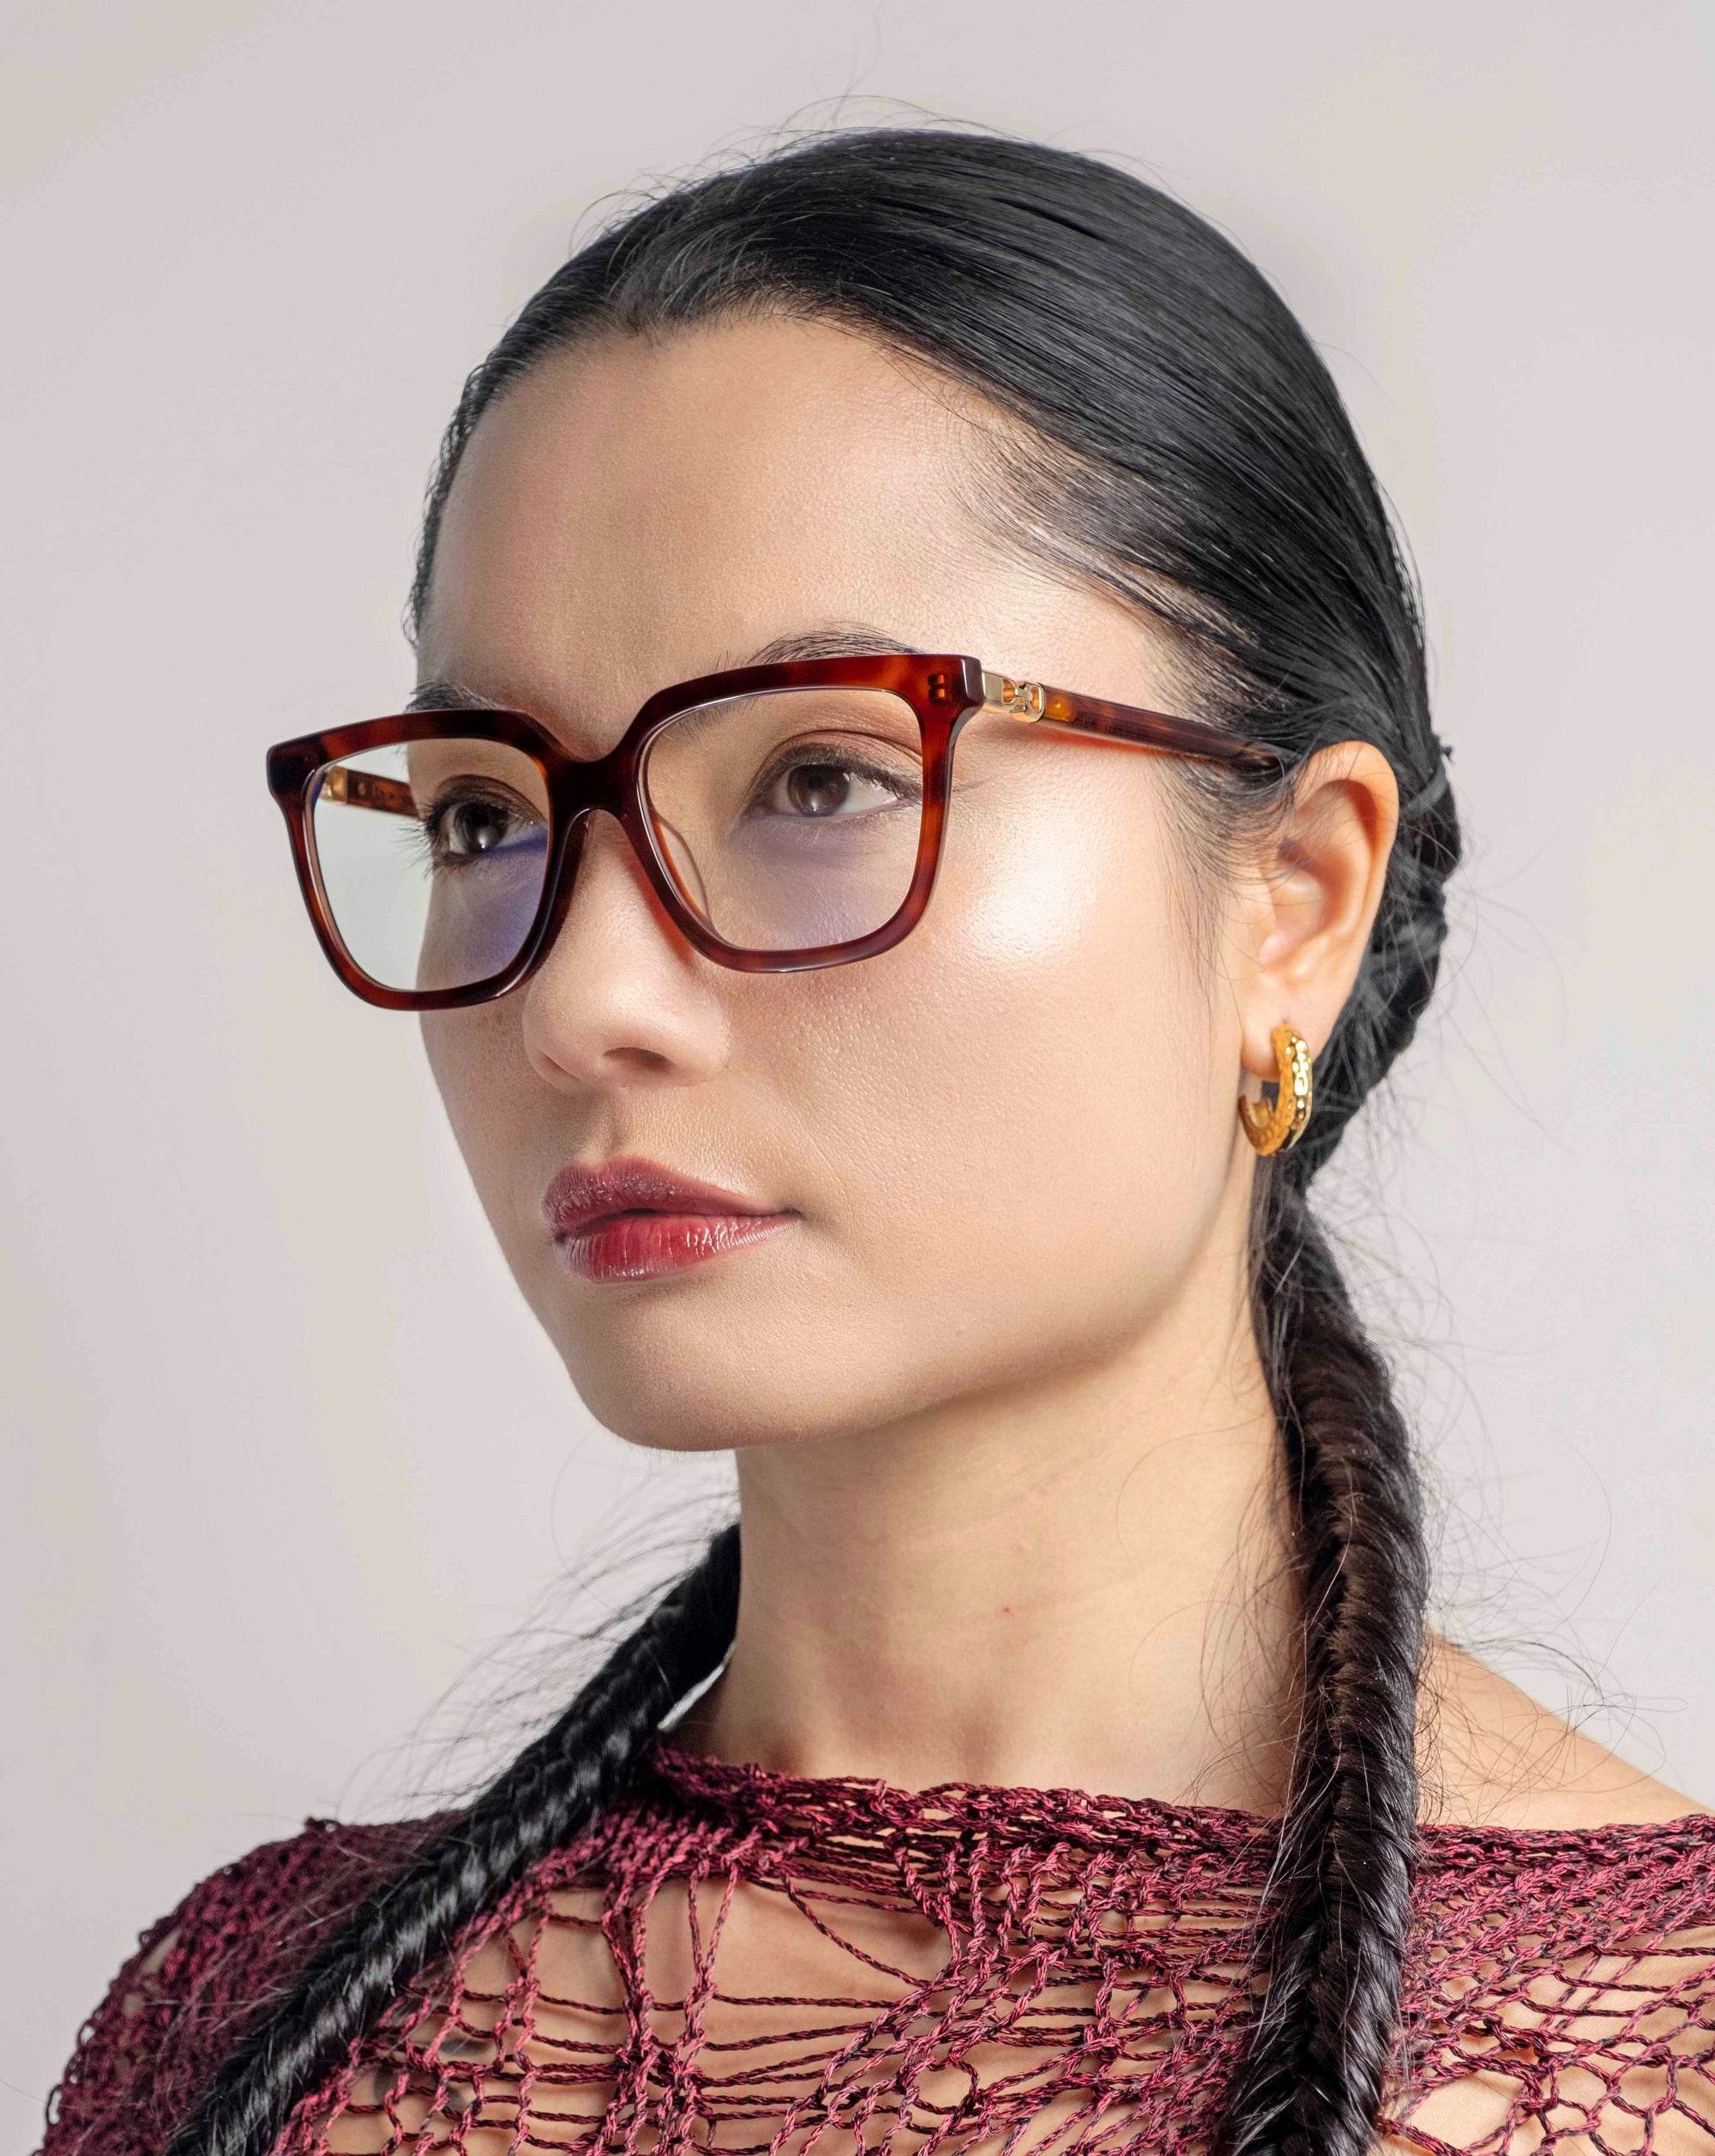 A woman with long black hair styled in two braids is wearing large, tortoiseshell For Art&#39;s Sake® Nina glasses in a classic square silhouette and 18-karat gold hoop earrings. She is dressed in a red, intricately woven top and is posed against a neutral background, looking towards the left.